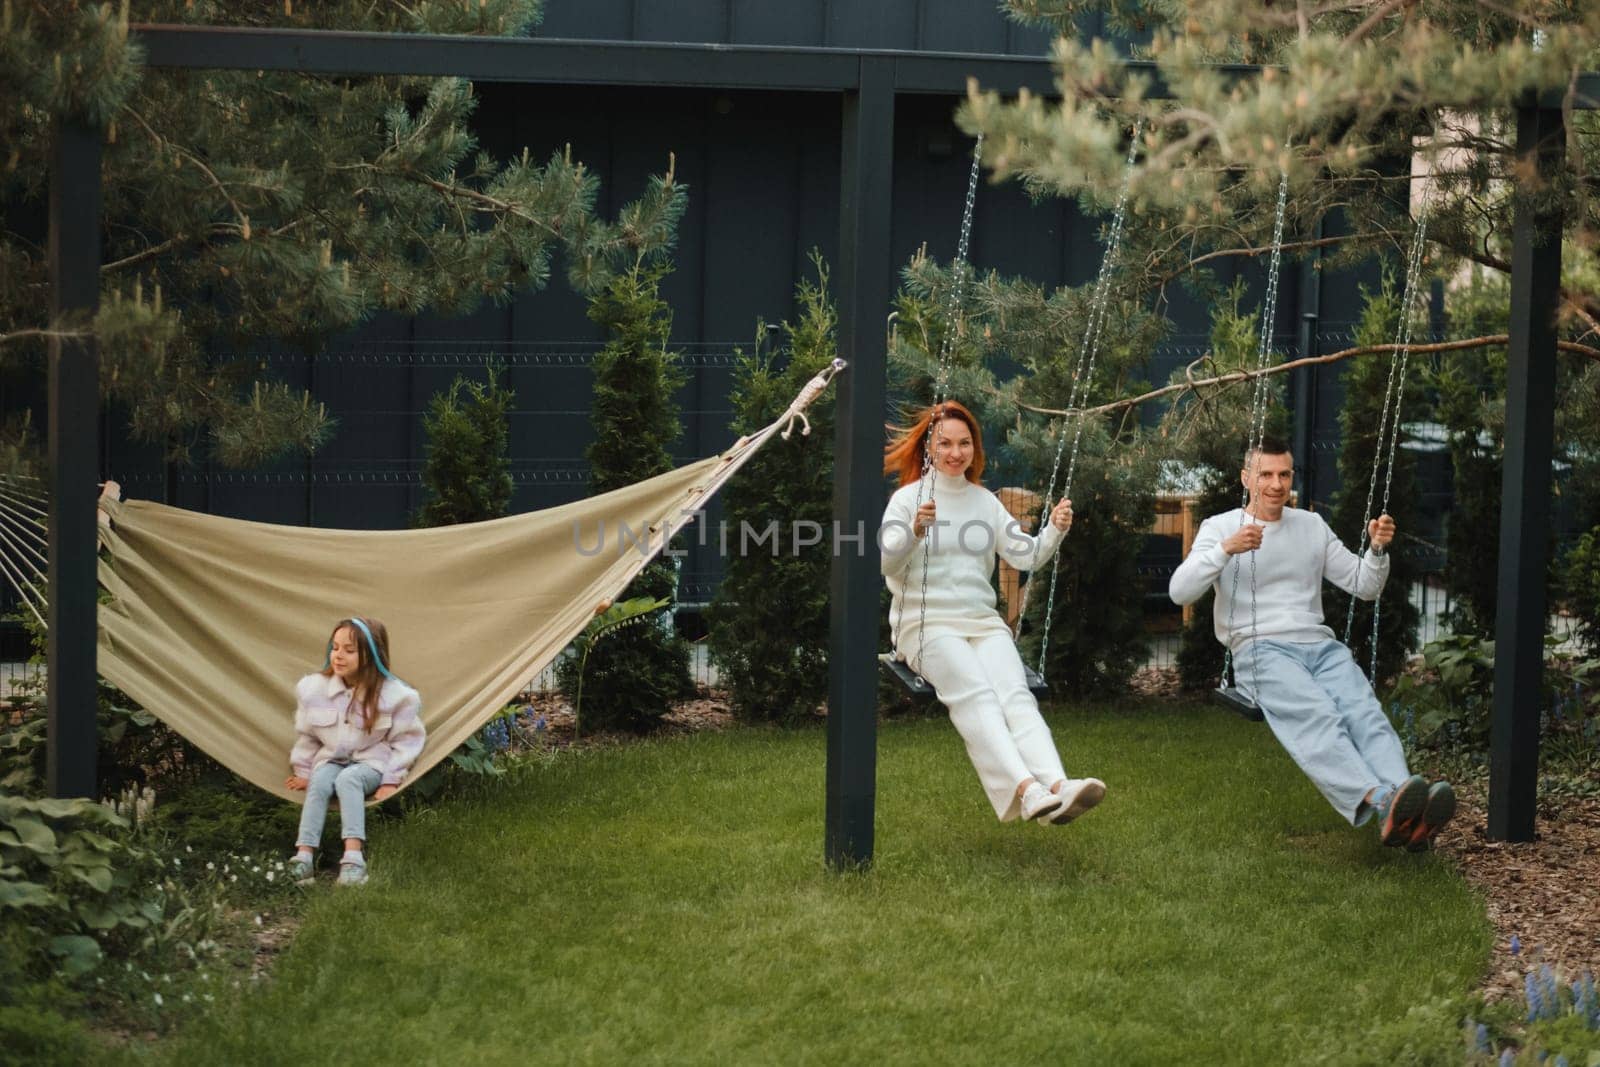 Mom and dad are riding on a swing, and their daughter is on a hammock next to them. The family is resting on a swing by Lobachad